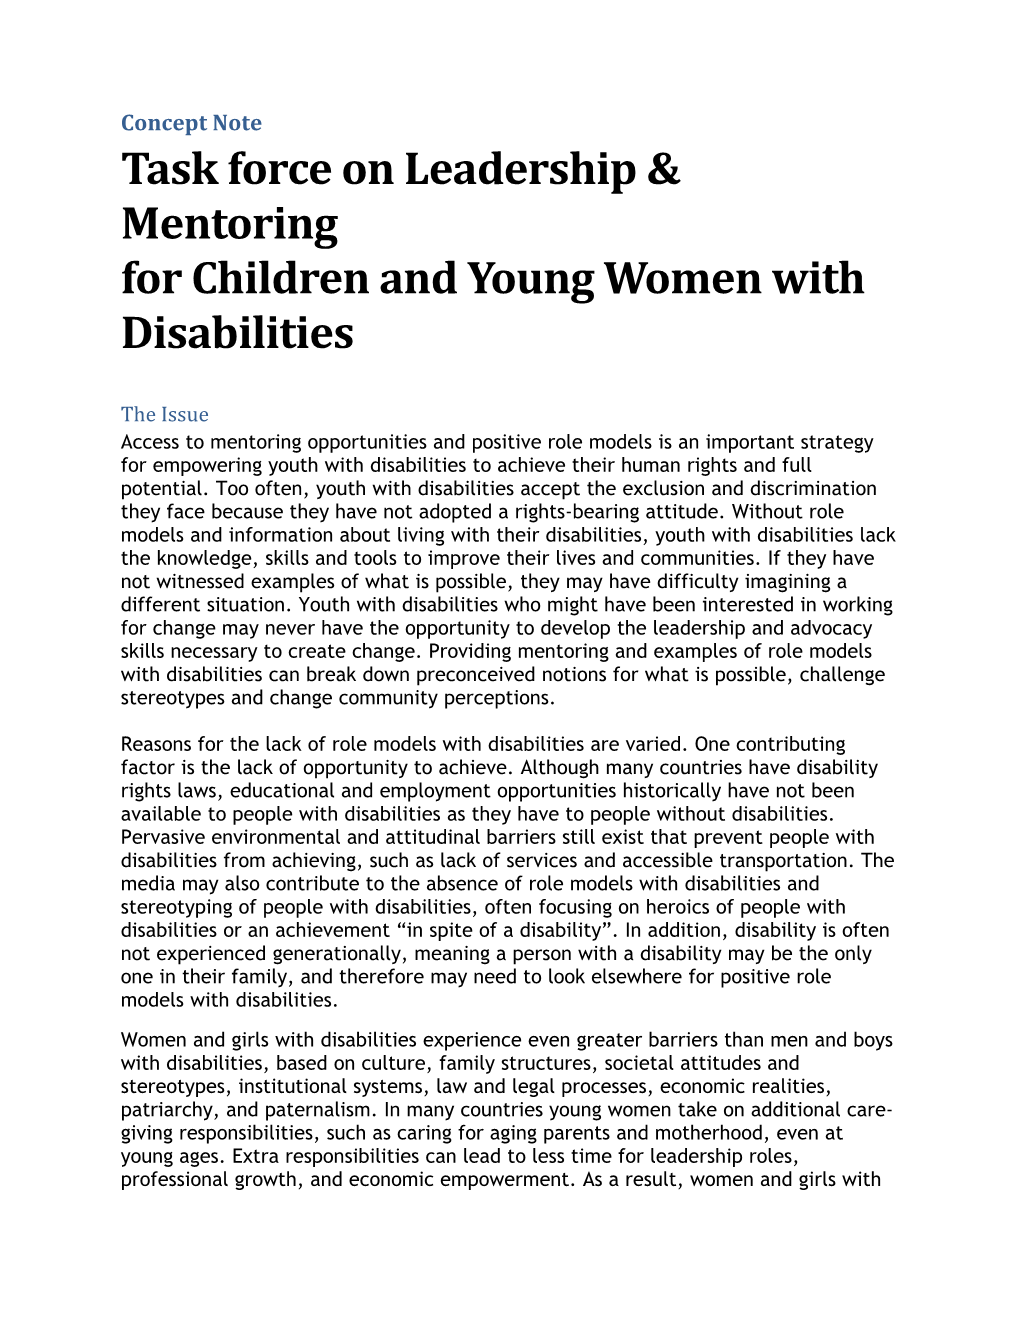 Task Force on Leadership & Mentoring for Children and Young Women with Disabilities